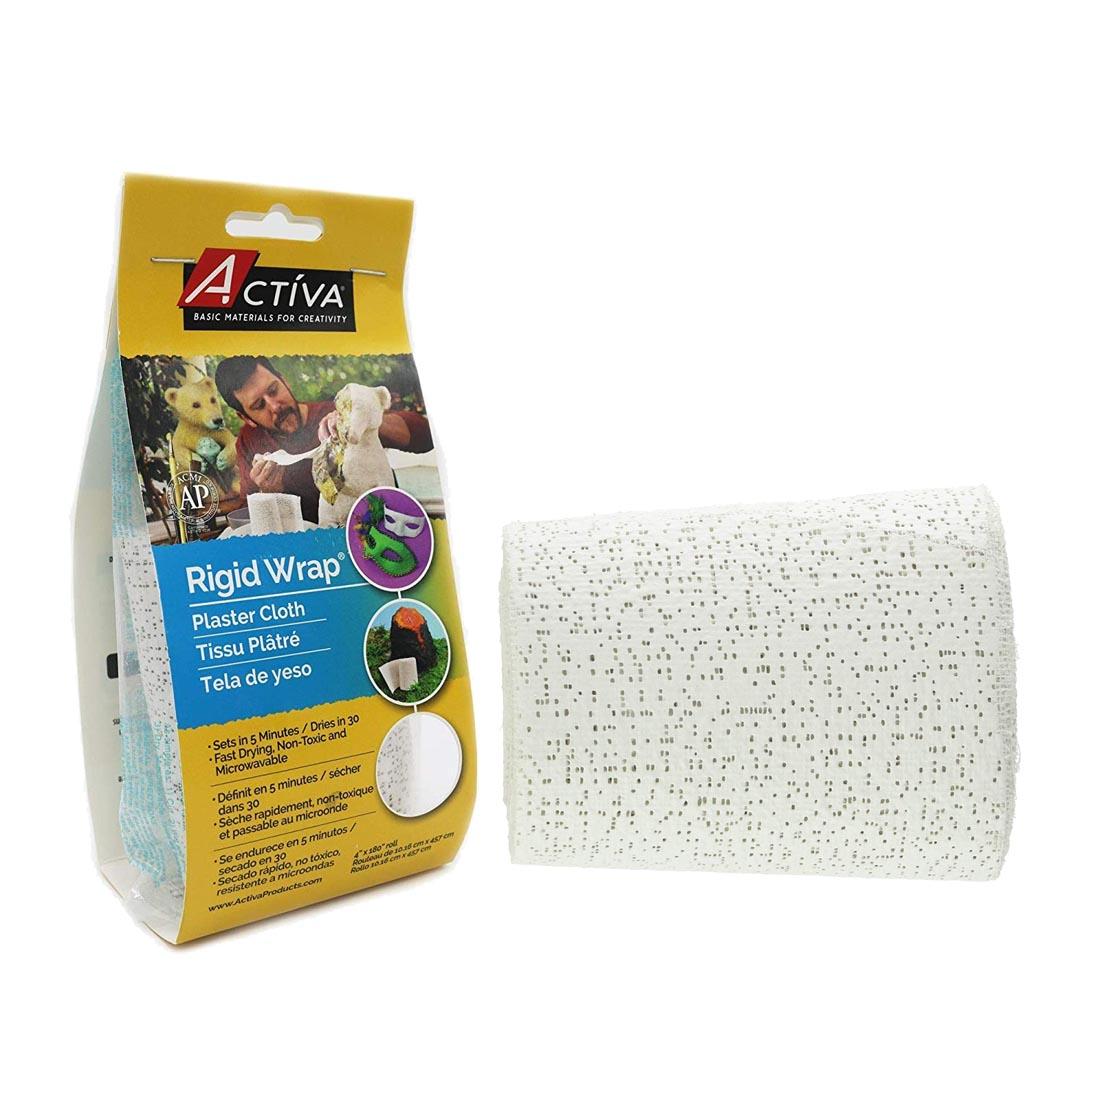 package and a roll of Rigid Wrap plaster cloth